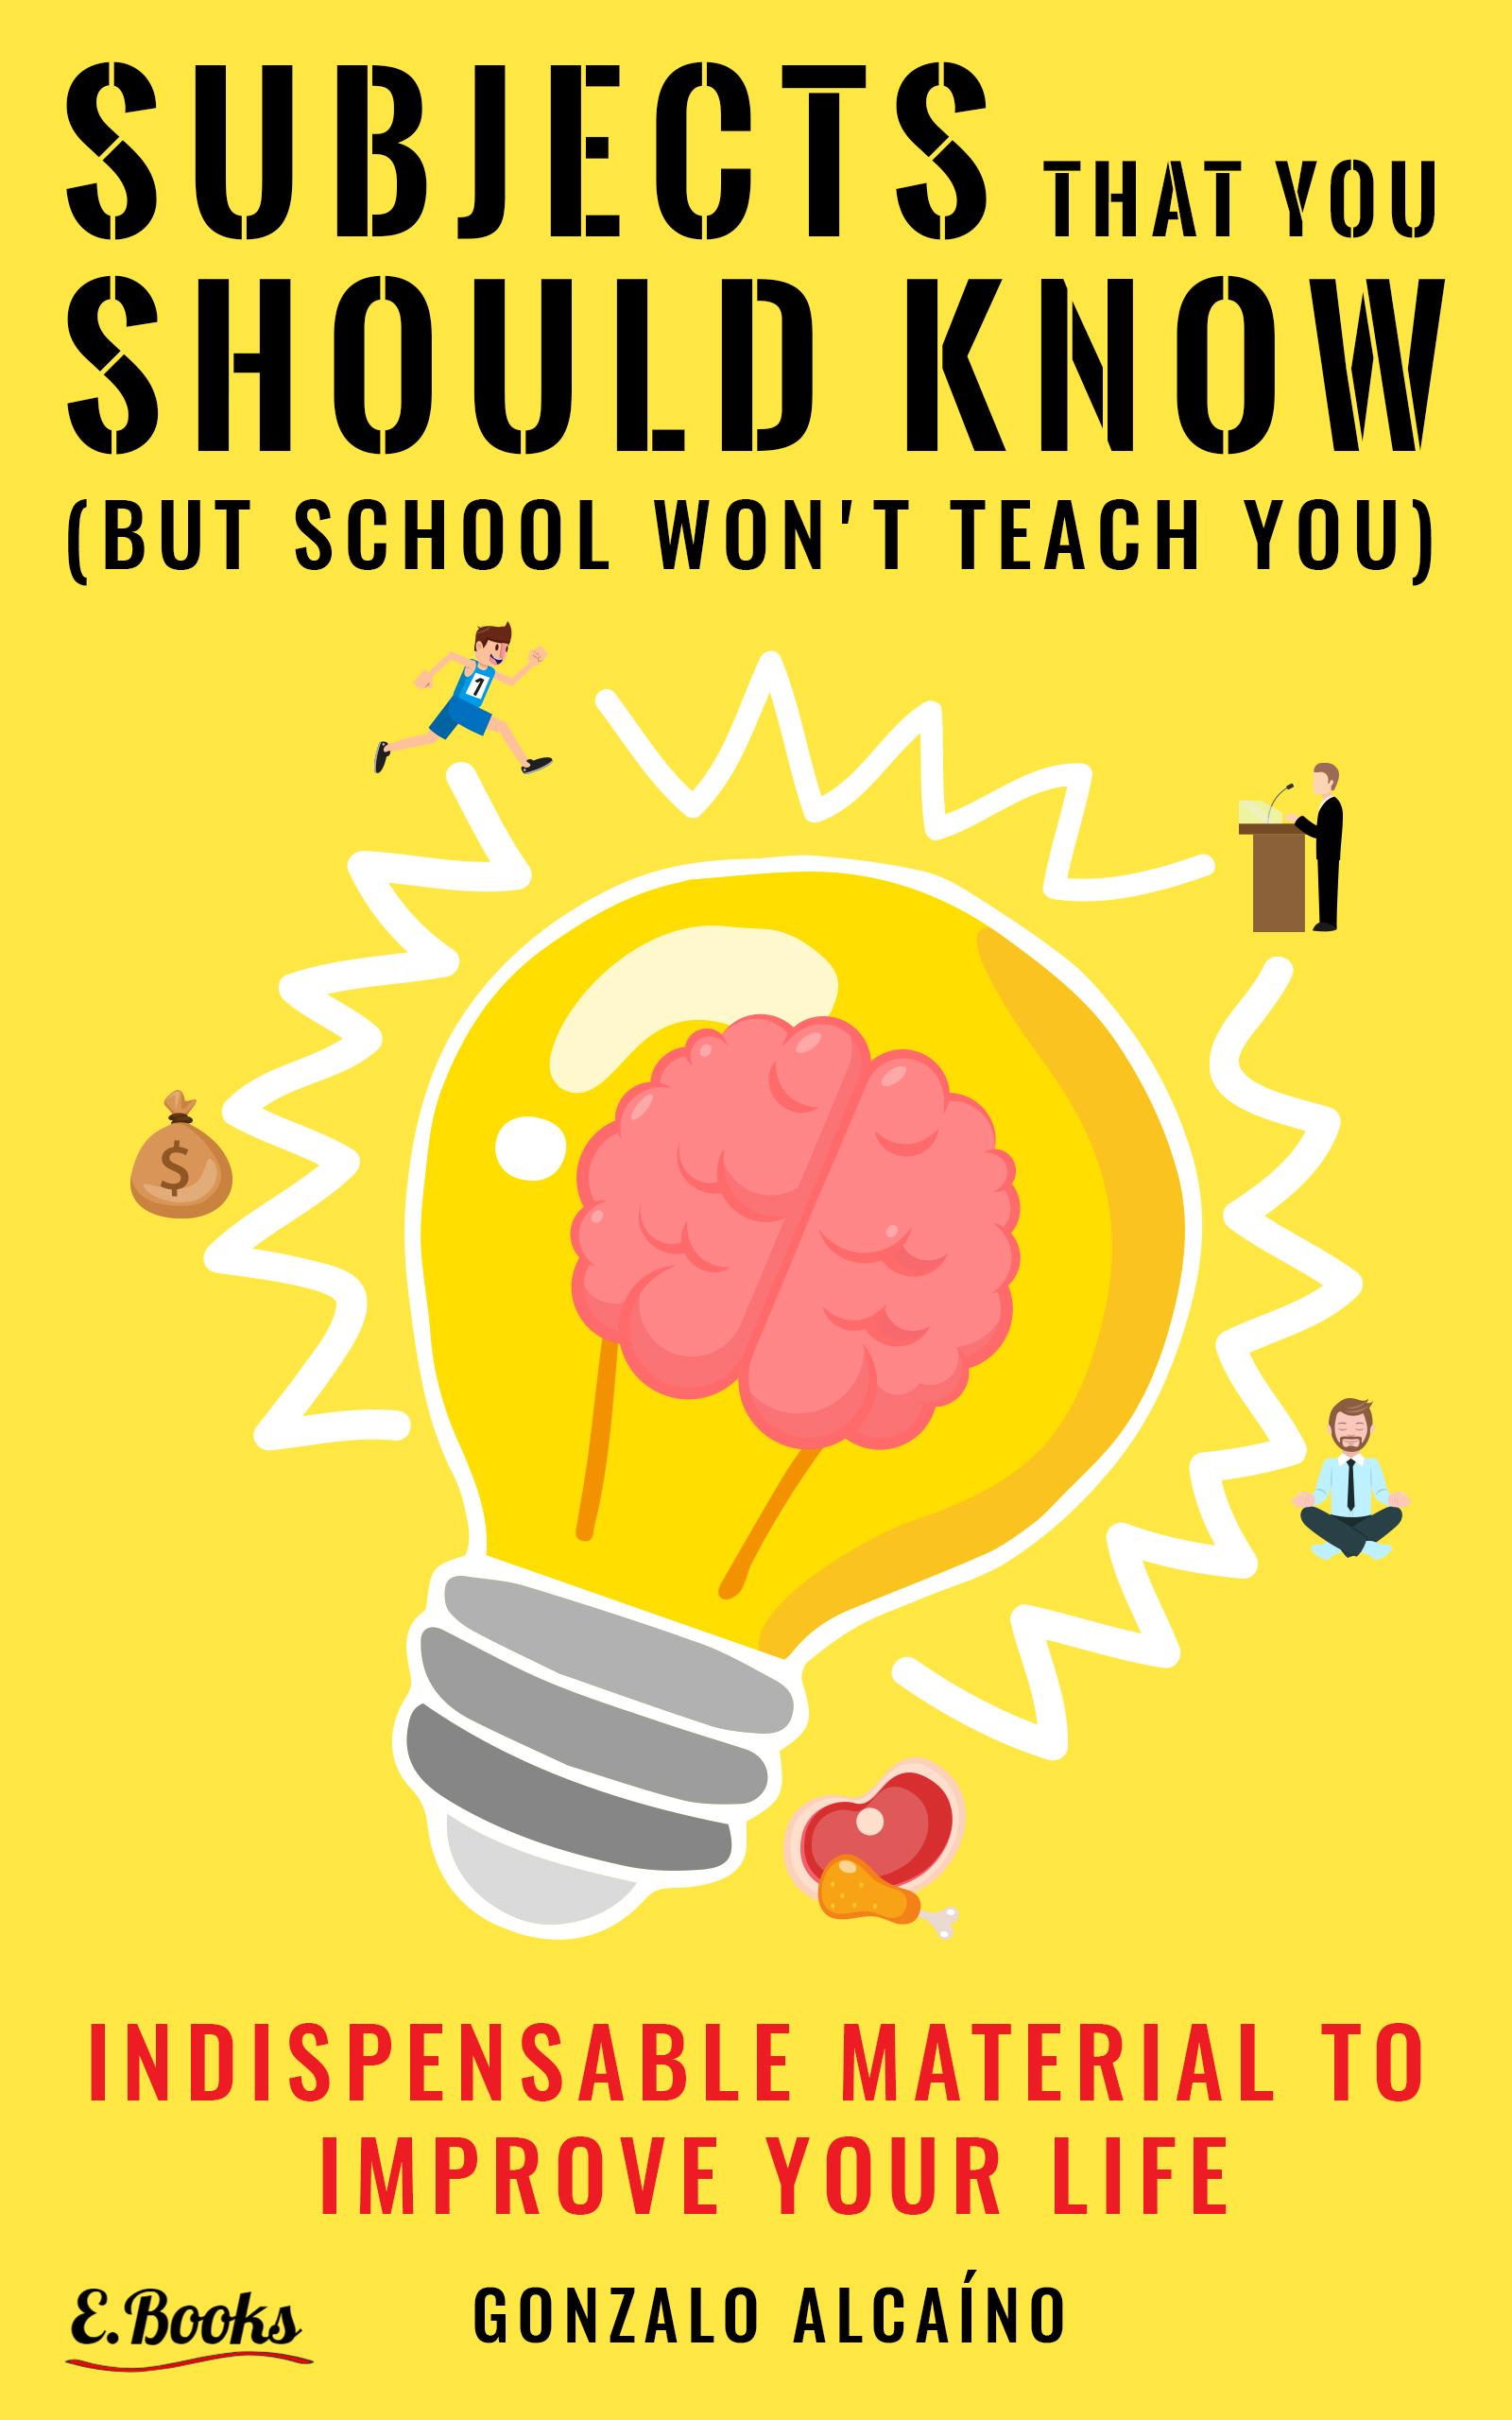 FREE: SUBJECTS THAT YOU SHOULD KNOW (BUT SCHOOL WON’T TEACH YOU) by Gonzalo Alcaino